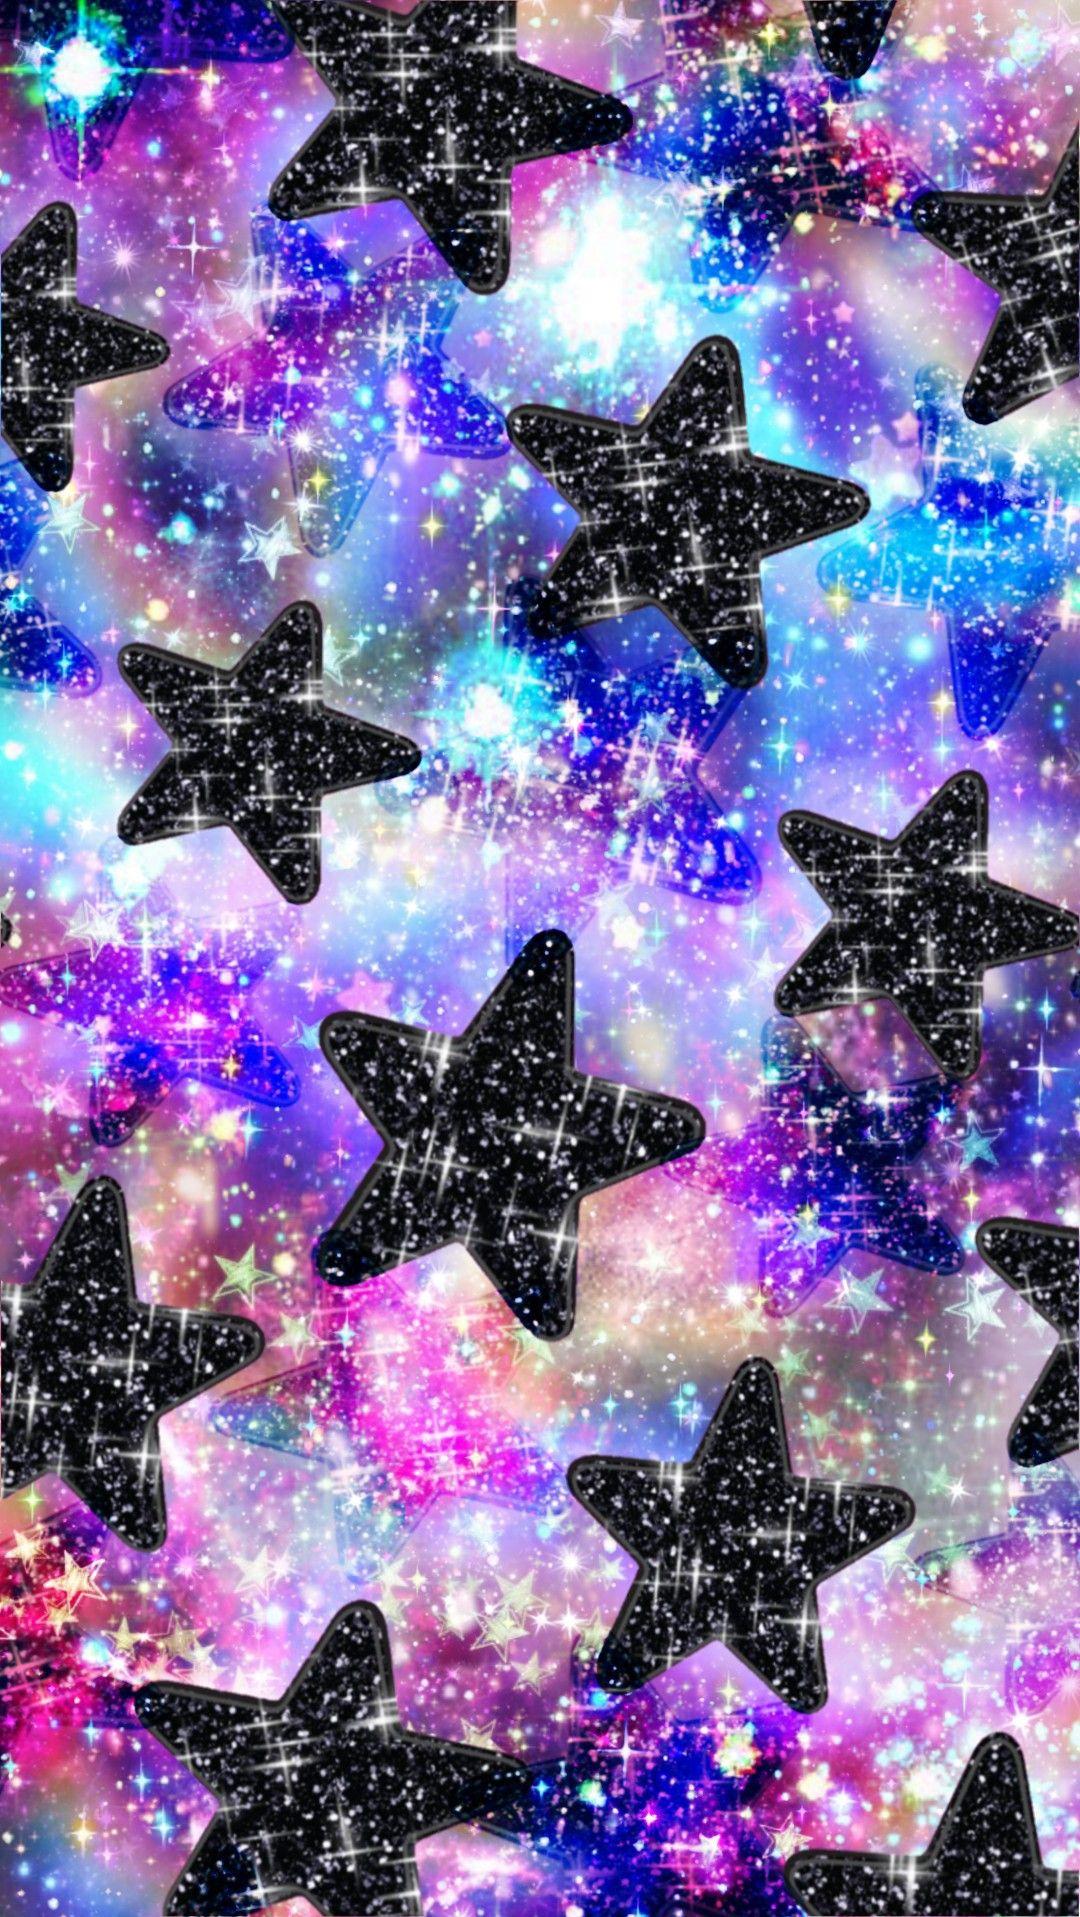 1080 x 1917 · jpeg - Sparkly Stars, made by me #purple #sparkly #wallpapers #backgrounds # ...